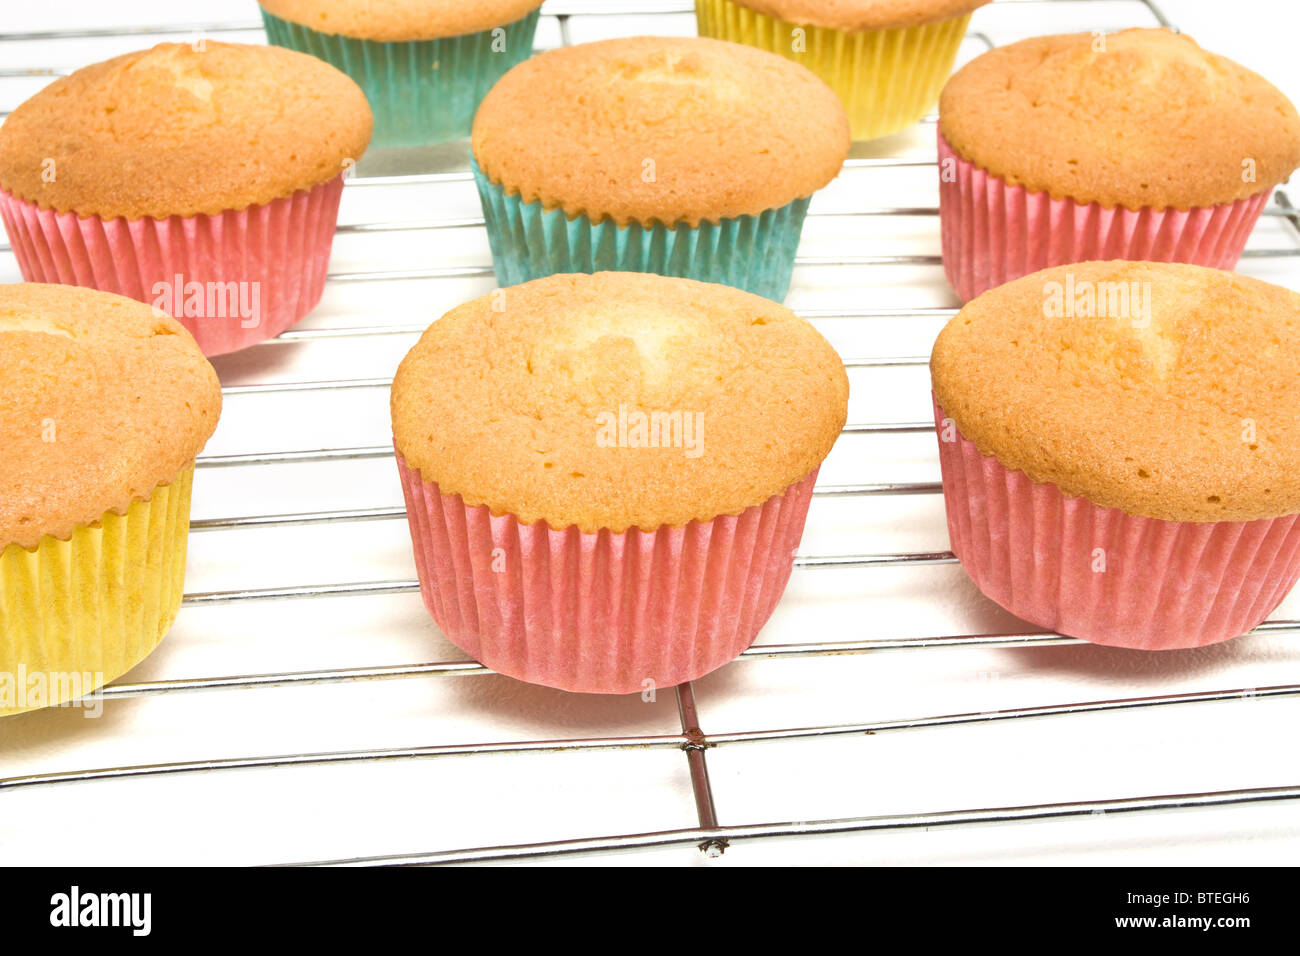 Home baked cupcakes cooling on wire mesh rack from low perspective isolated on white. Stock Photo